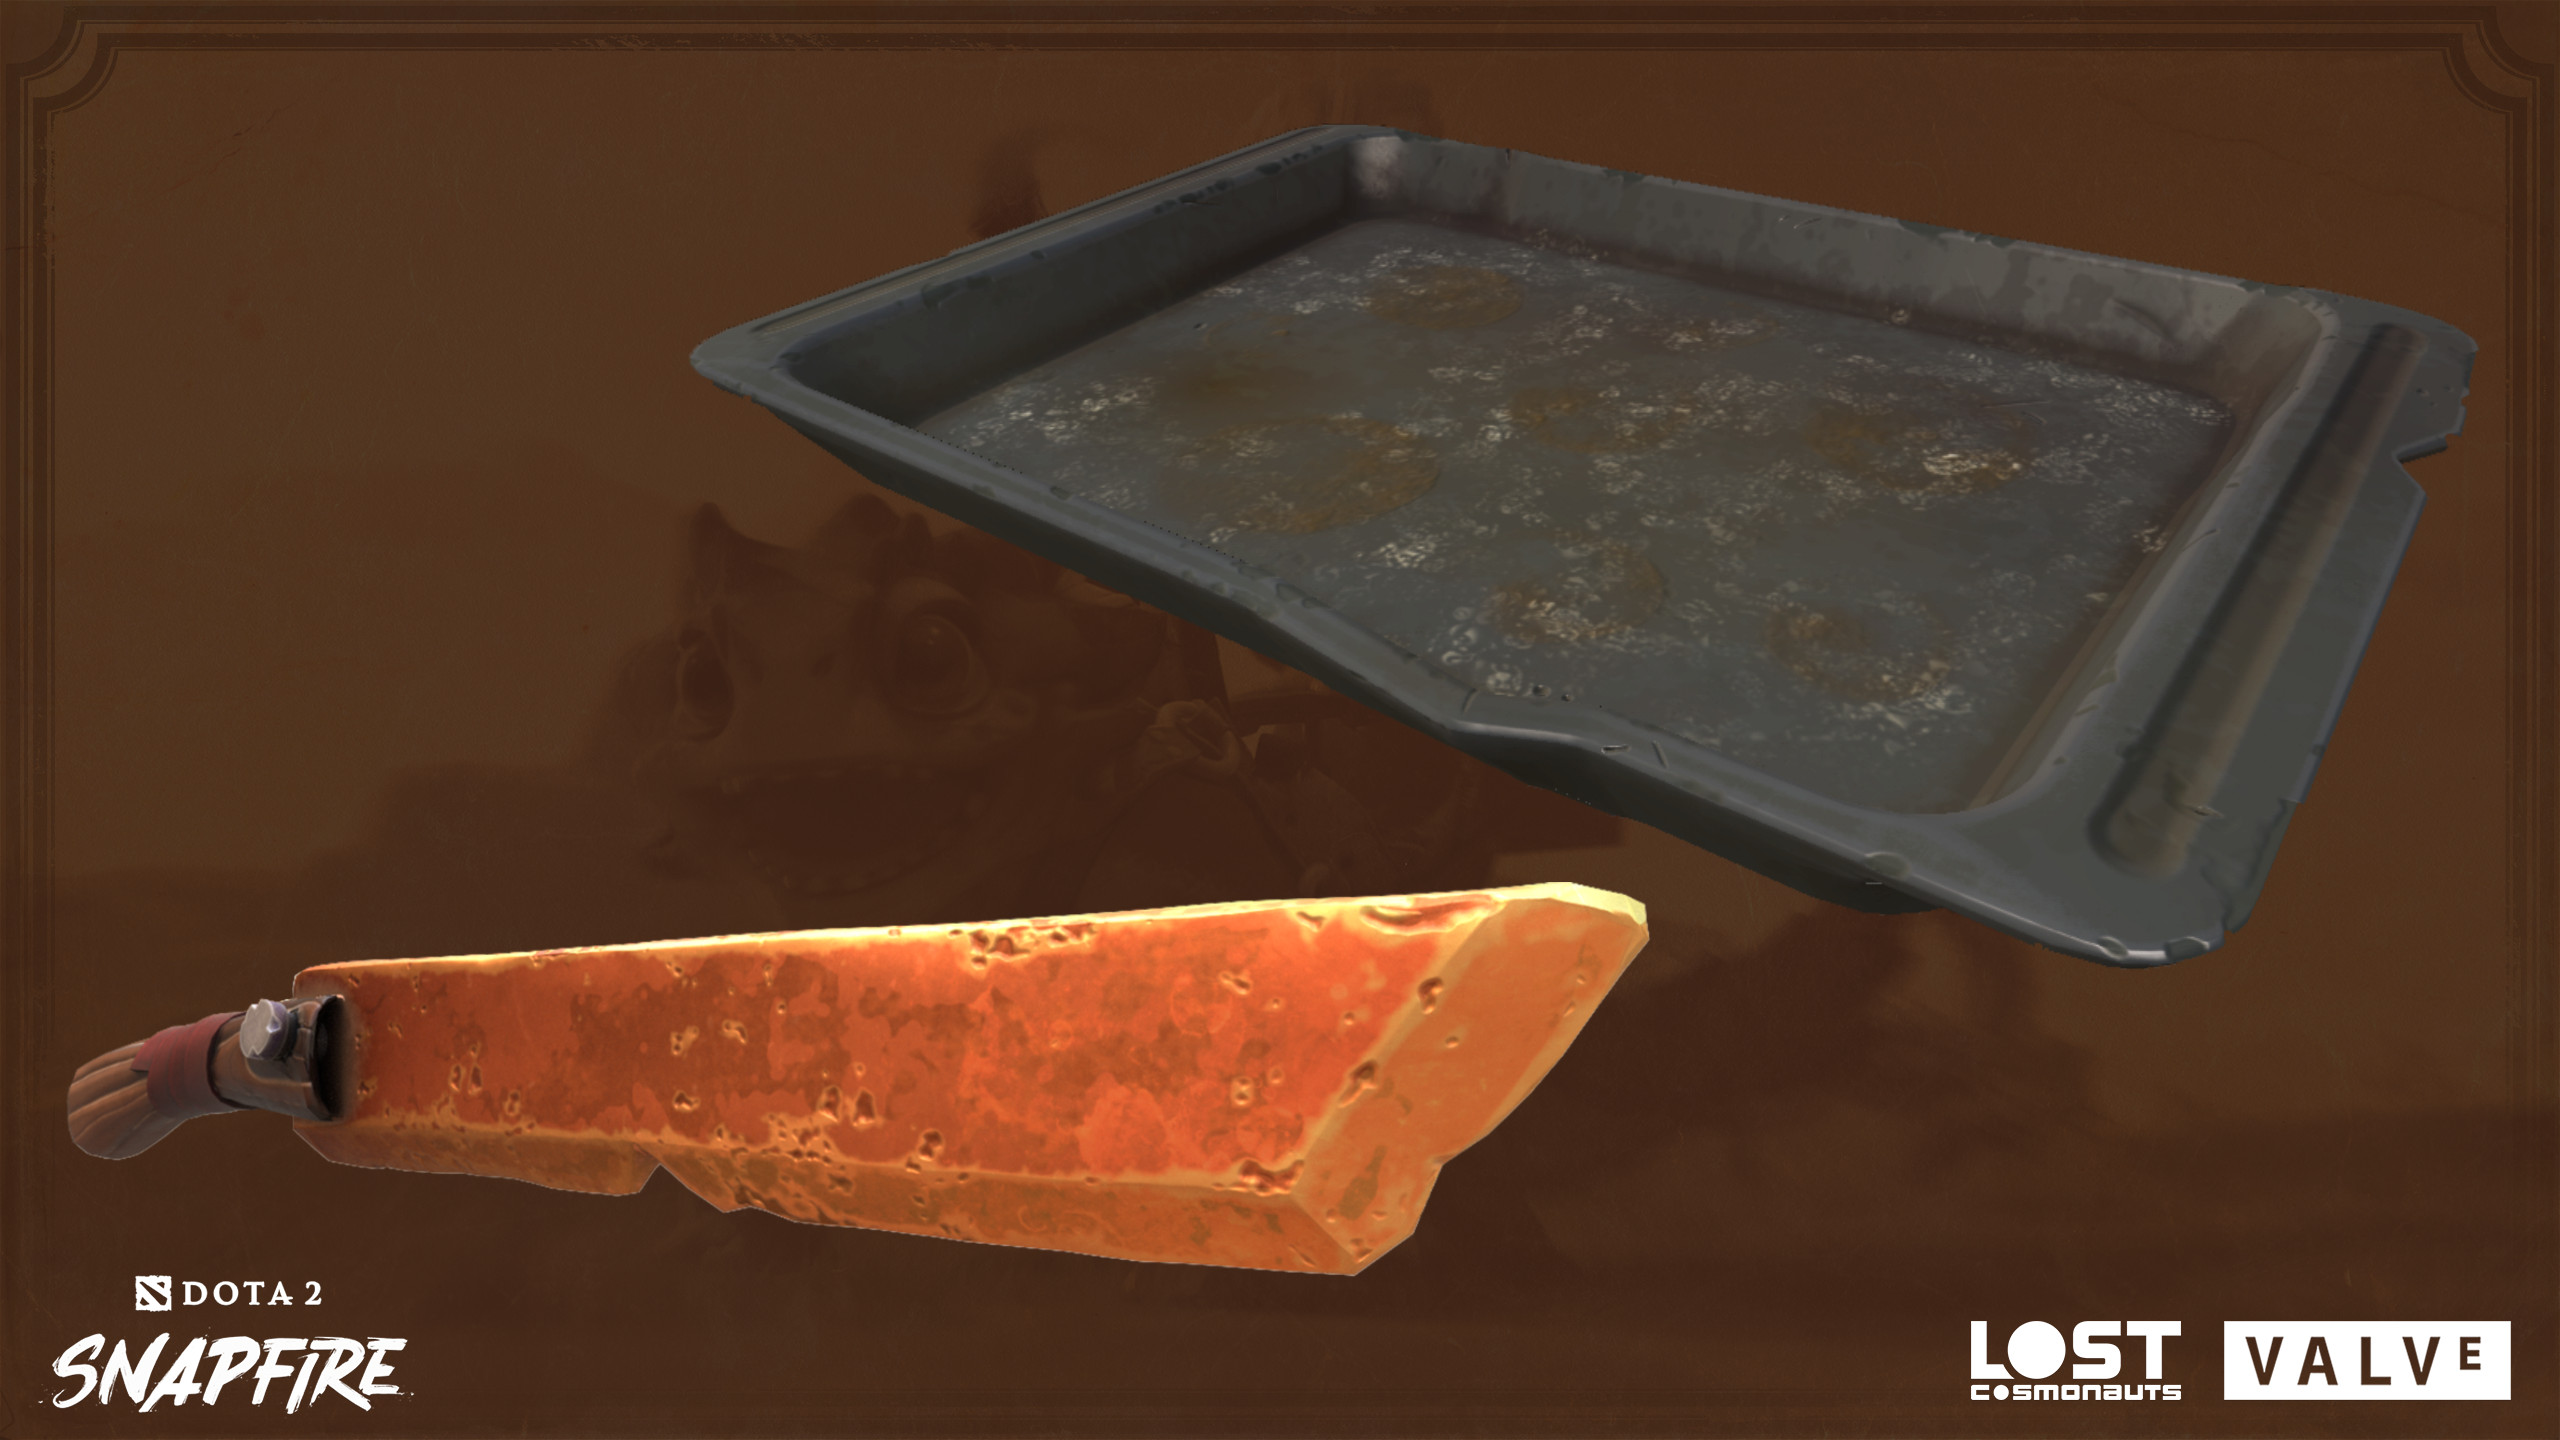 Tray by me, Sword modeled and textured by Denis Varchulik (https://www.artstation.com/xb33), detailing by me.